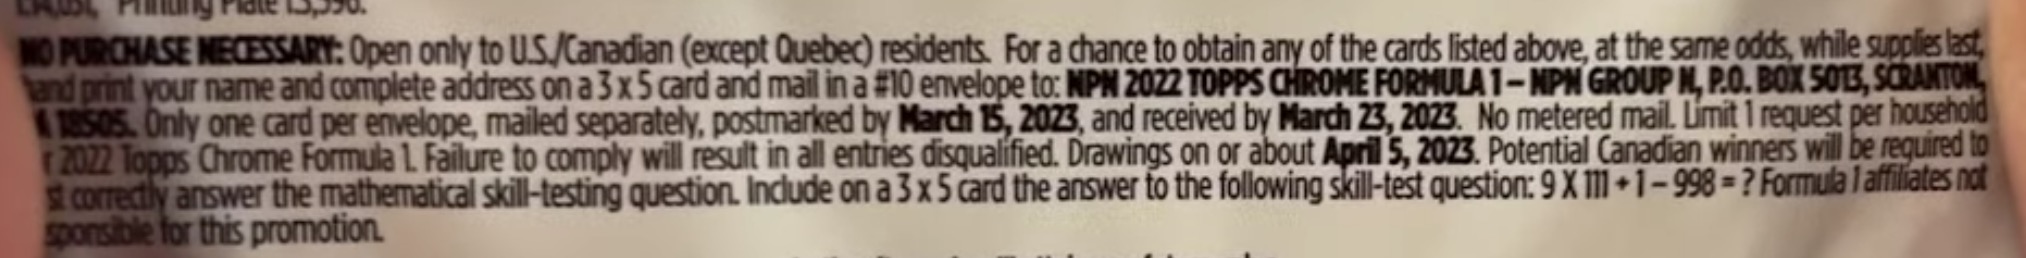 2022 Topps Chrome Formula 1 Racing Cards - Hobby Box - No Purchase Necessary (NPN) Information